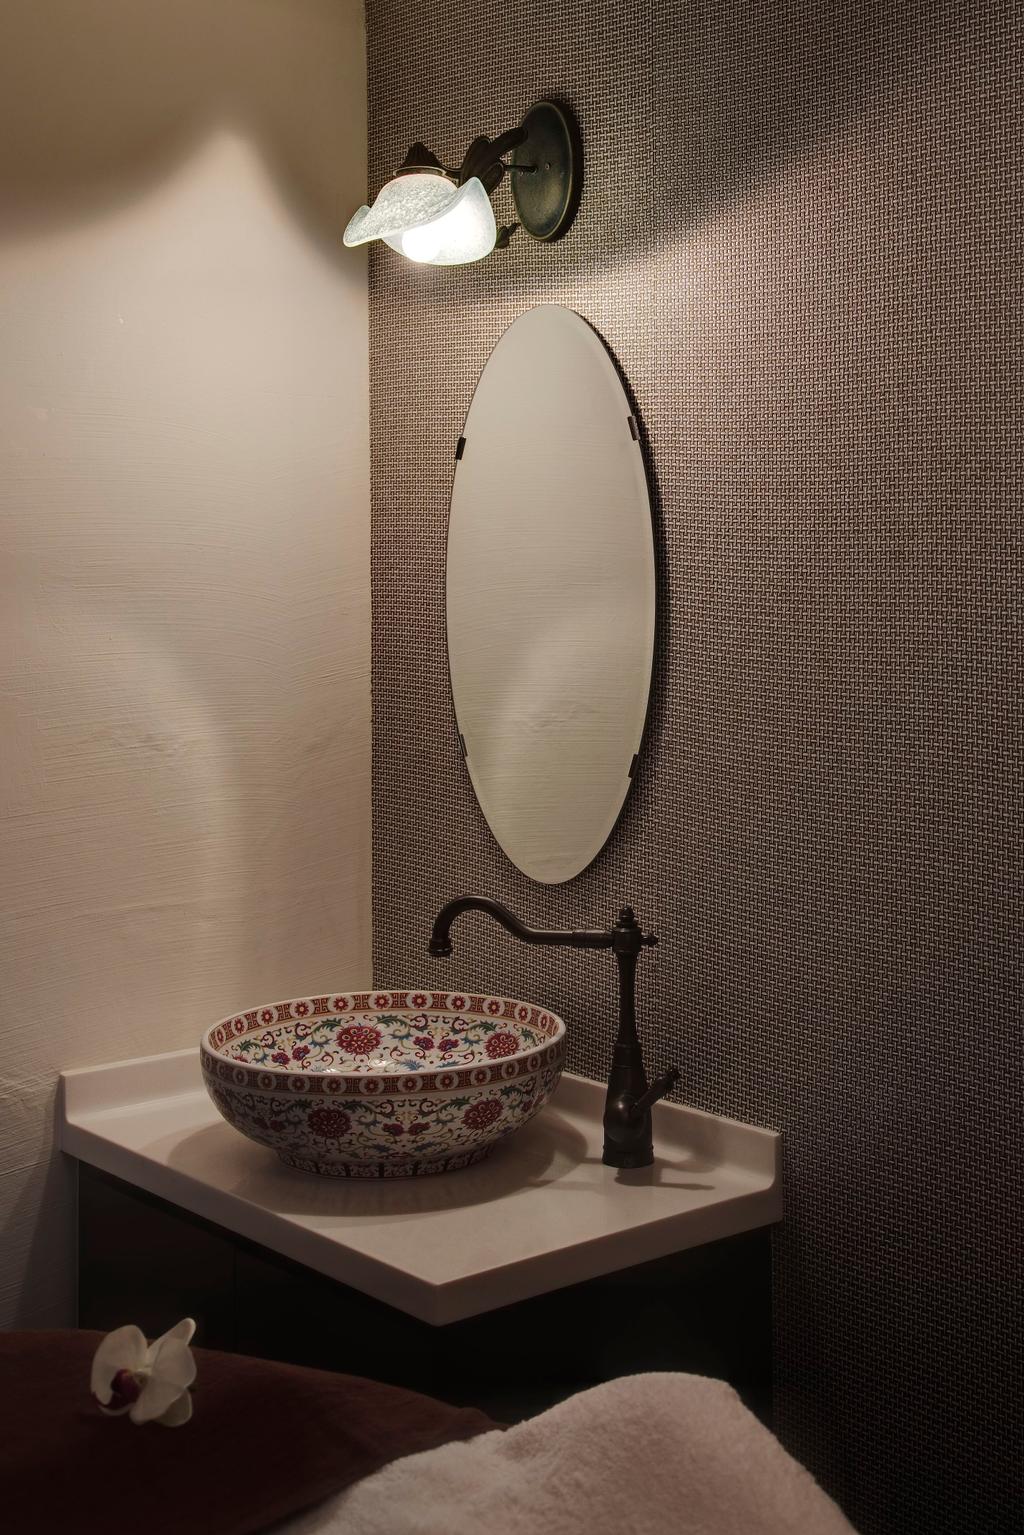 Sims Avenue, Commercial, Interior Designer, Liid Studio, Traditional, Bathroom, Oriental, Vessel Sink, Mirror, Tv Feature Wall, Woven, Wall Lamp, Bathroom Counter, Feature Wall